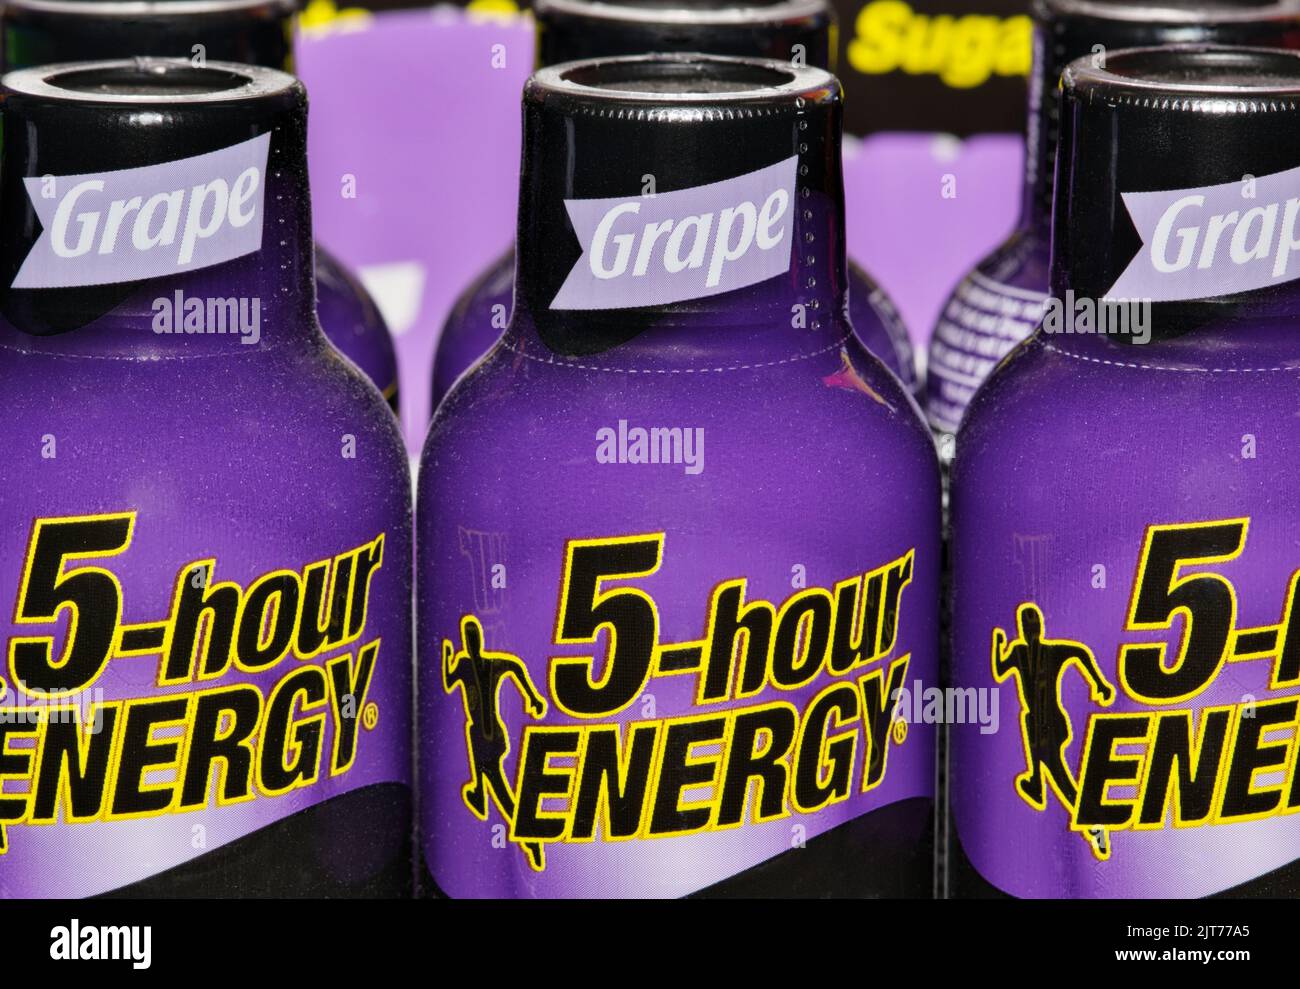 Houston, Texas USA 08-07-2022: 5-hour energy shot drinks, grape flavor closeup on a supermarket display. Manufactured by Living Essentials LLC company Stock Photo